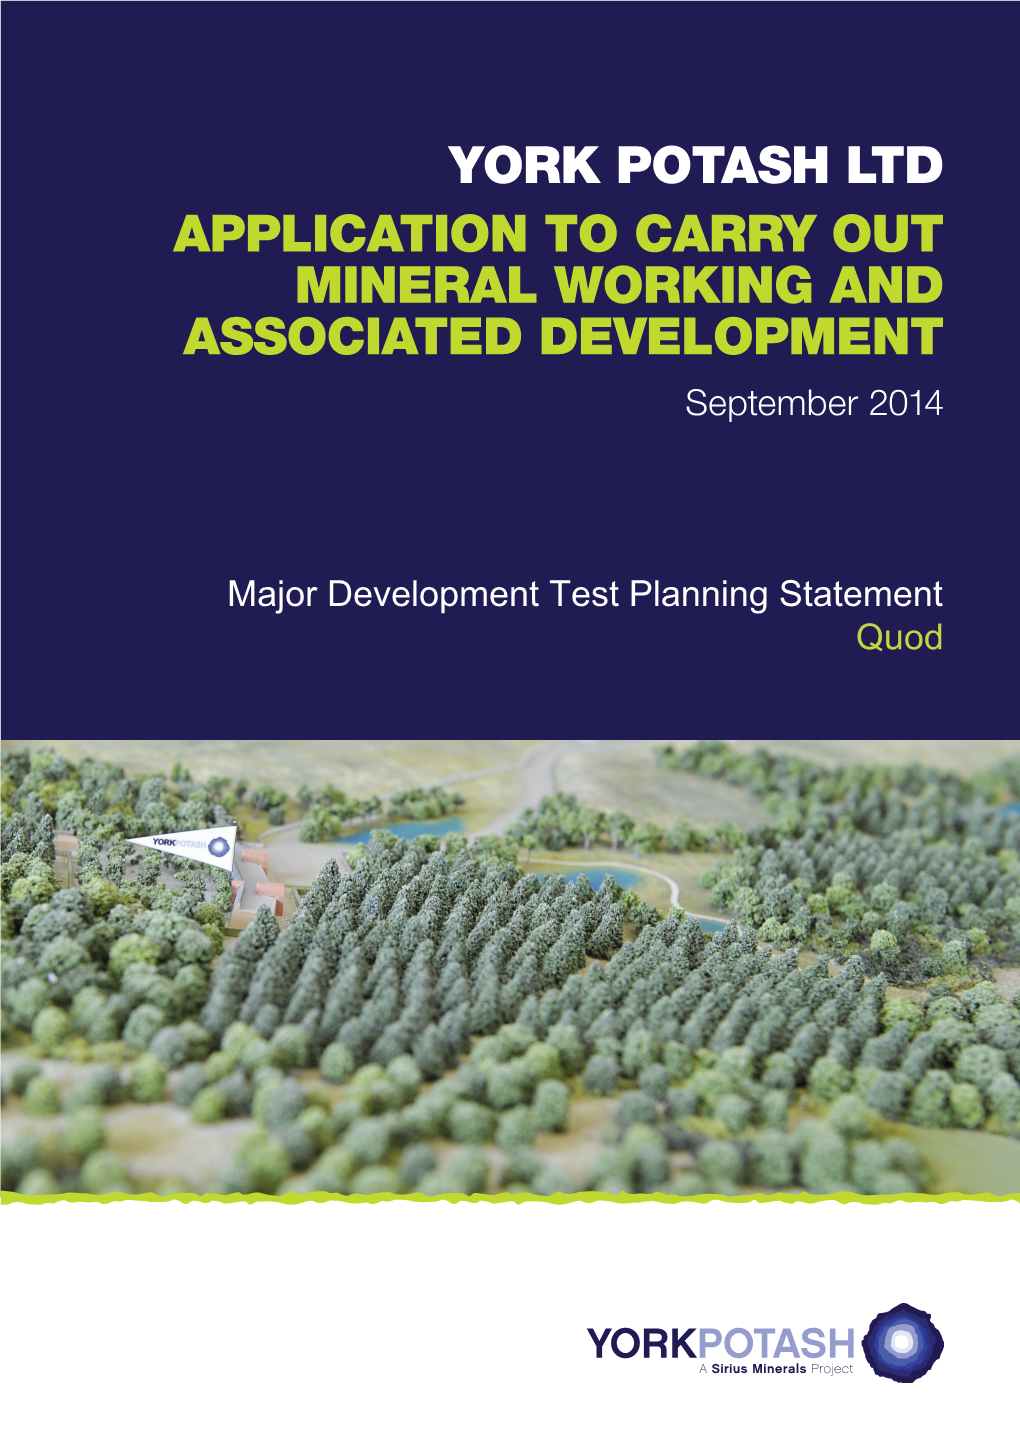 YORK POTASH LTD APPLICATION to CARRY out MINERAL WORKING and ASSOCIATED DEVELOPMENT September 2014